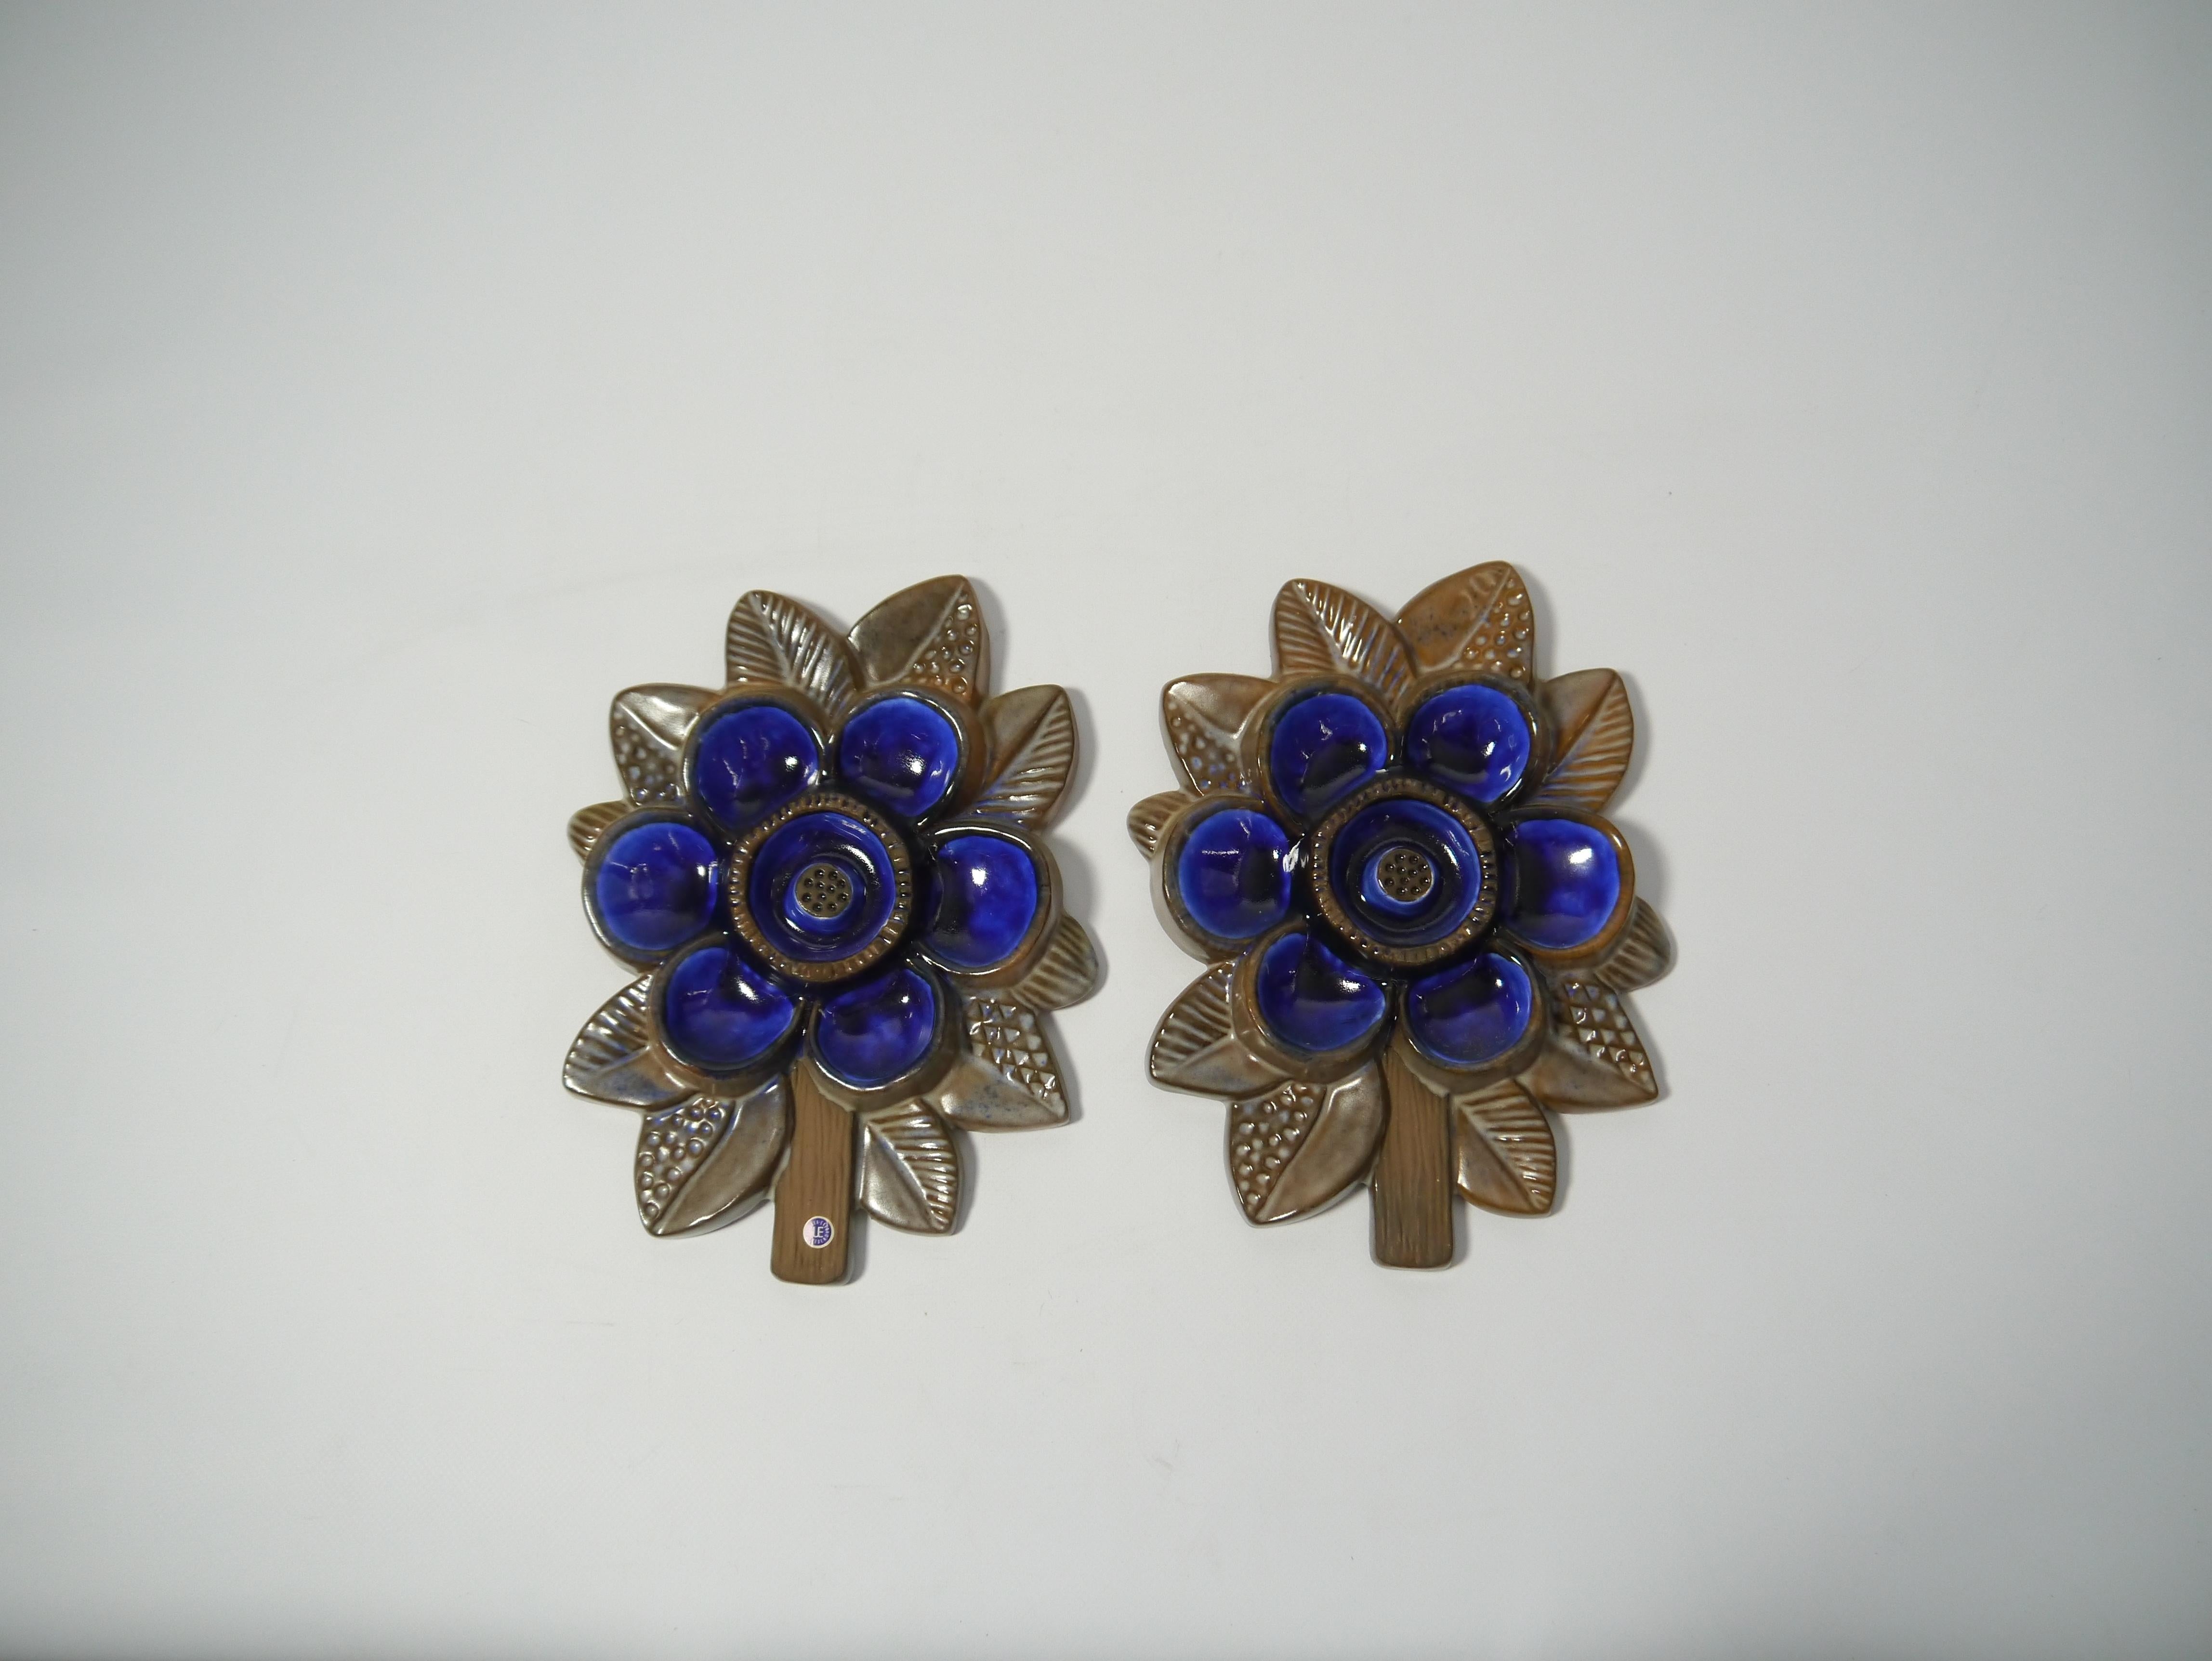 A pair of glazed ceramic flower wall plaques, made by ceramist Irma Yourstone for Upsala Ekeby, Sweden, 1970s.